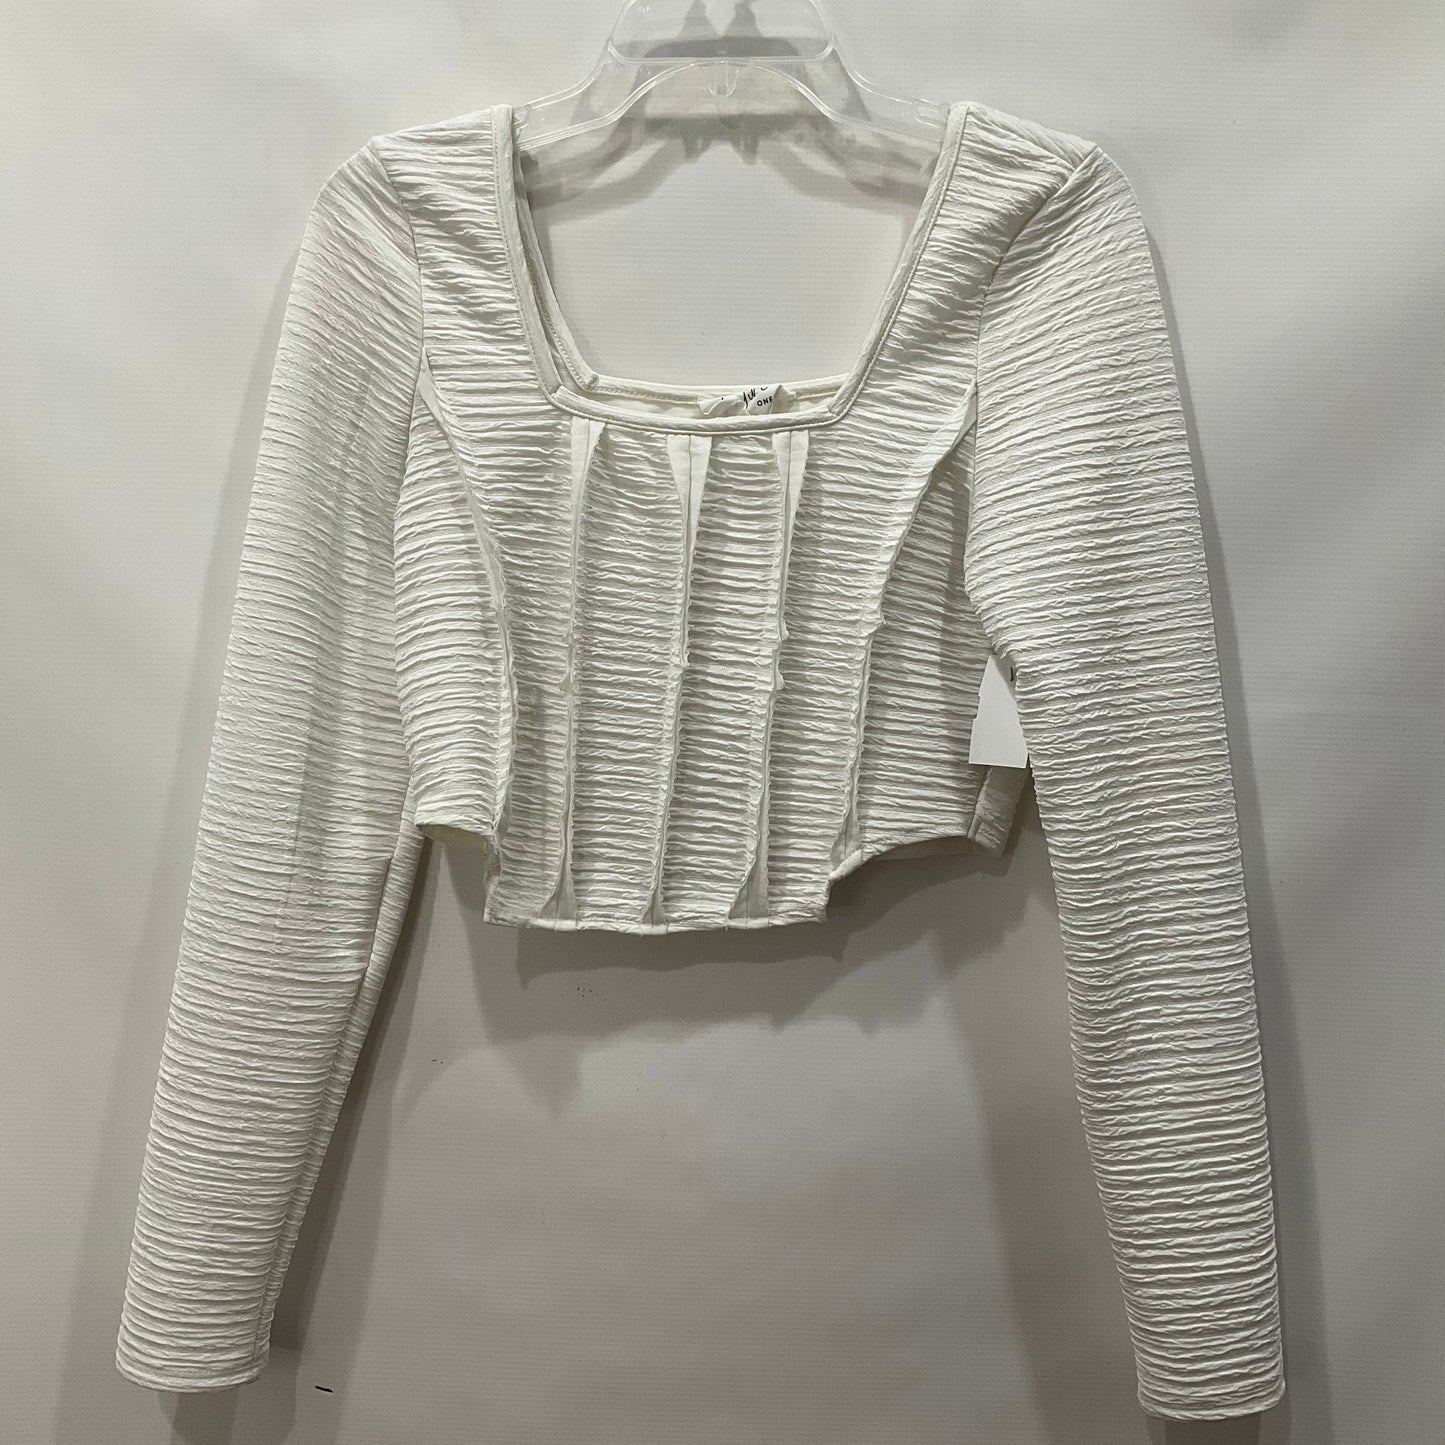 White Top Long Sleeve The Native One, Size L